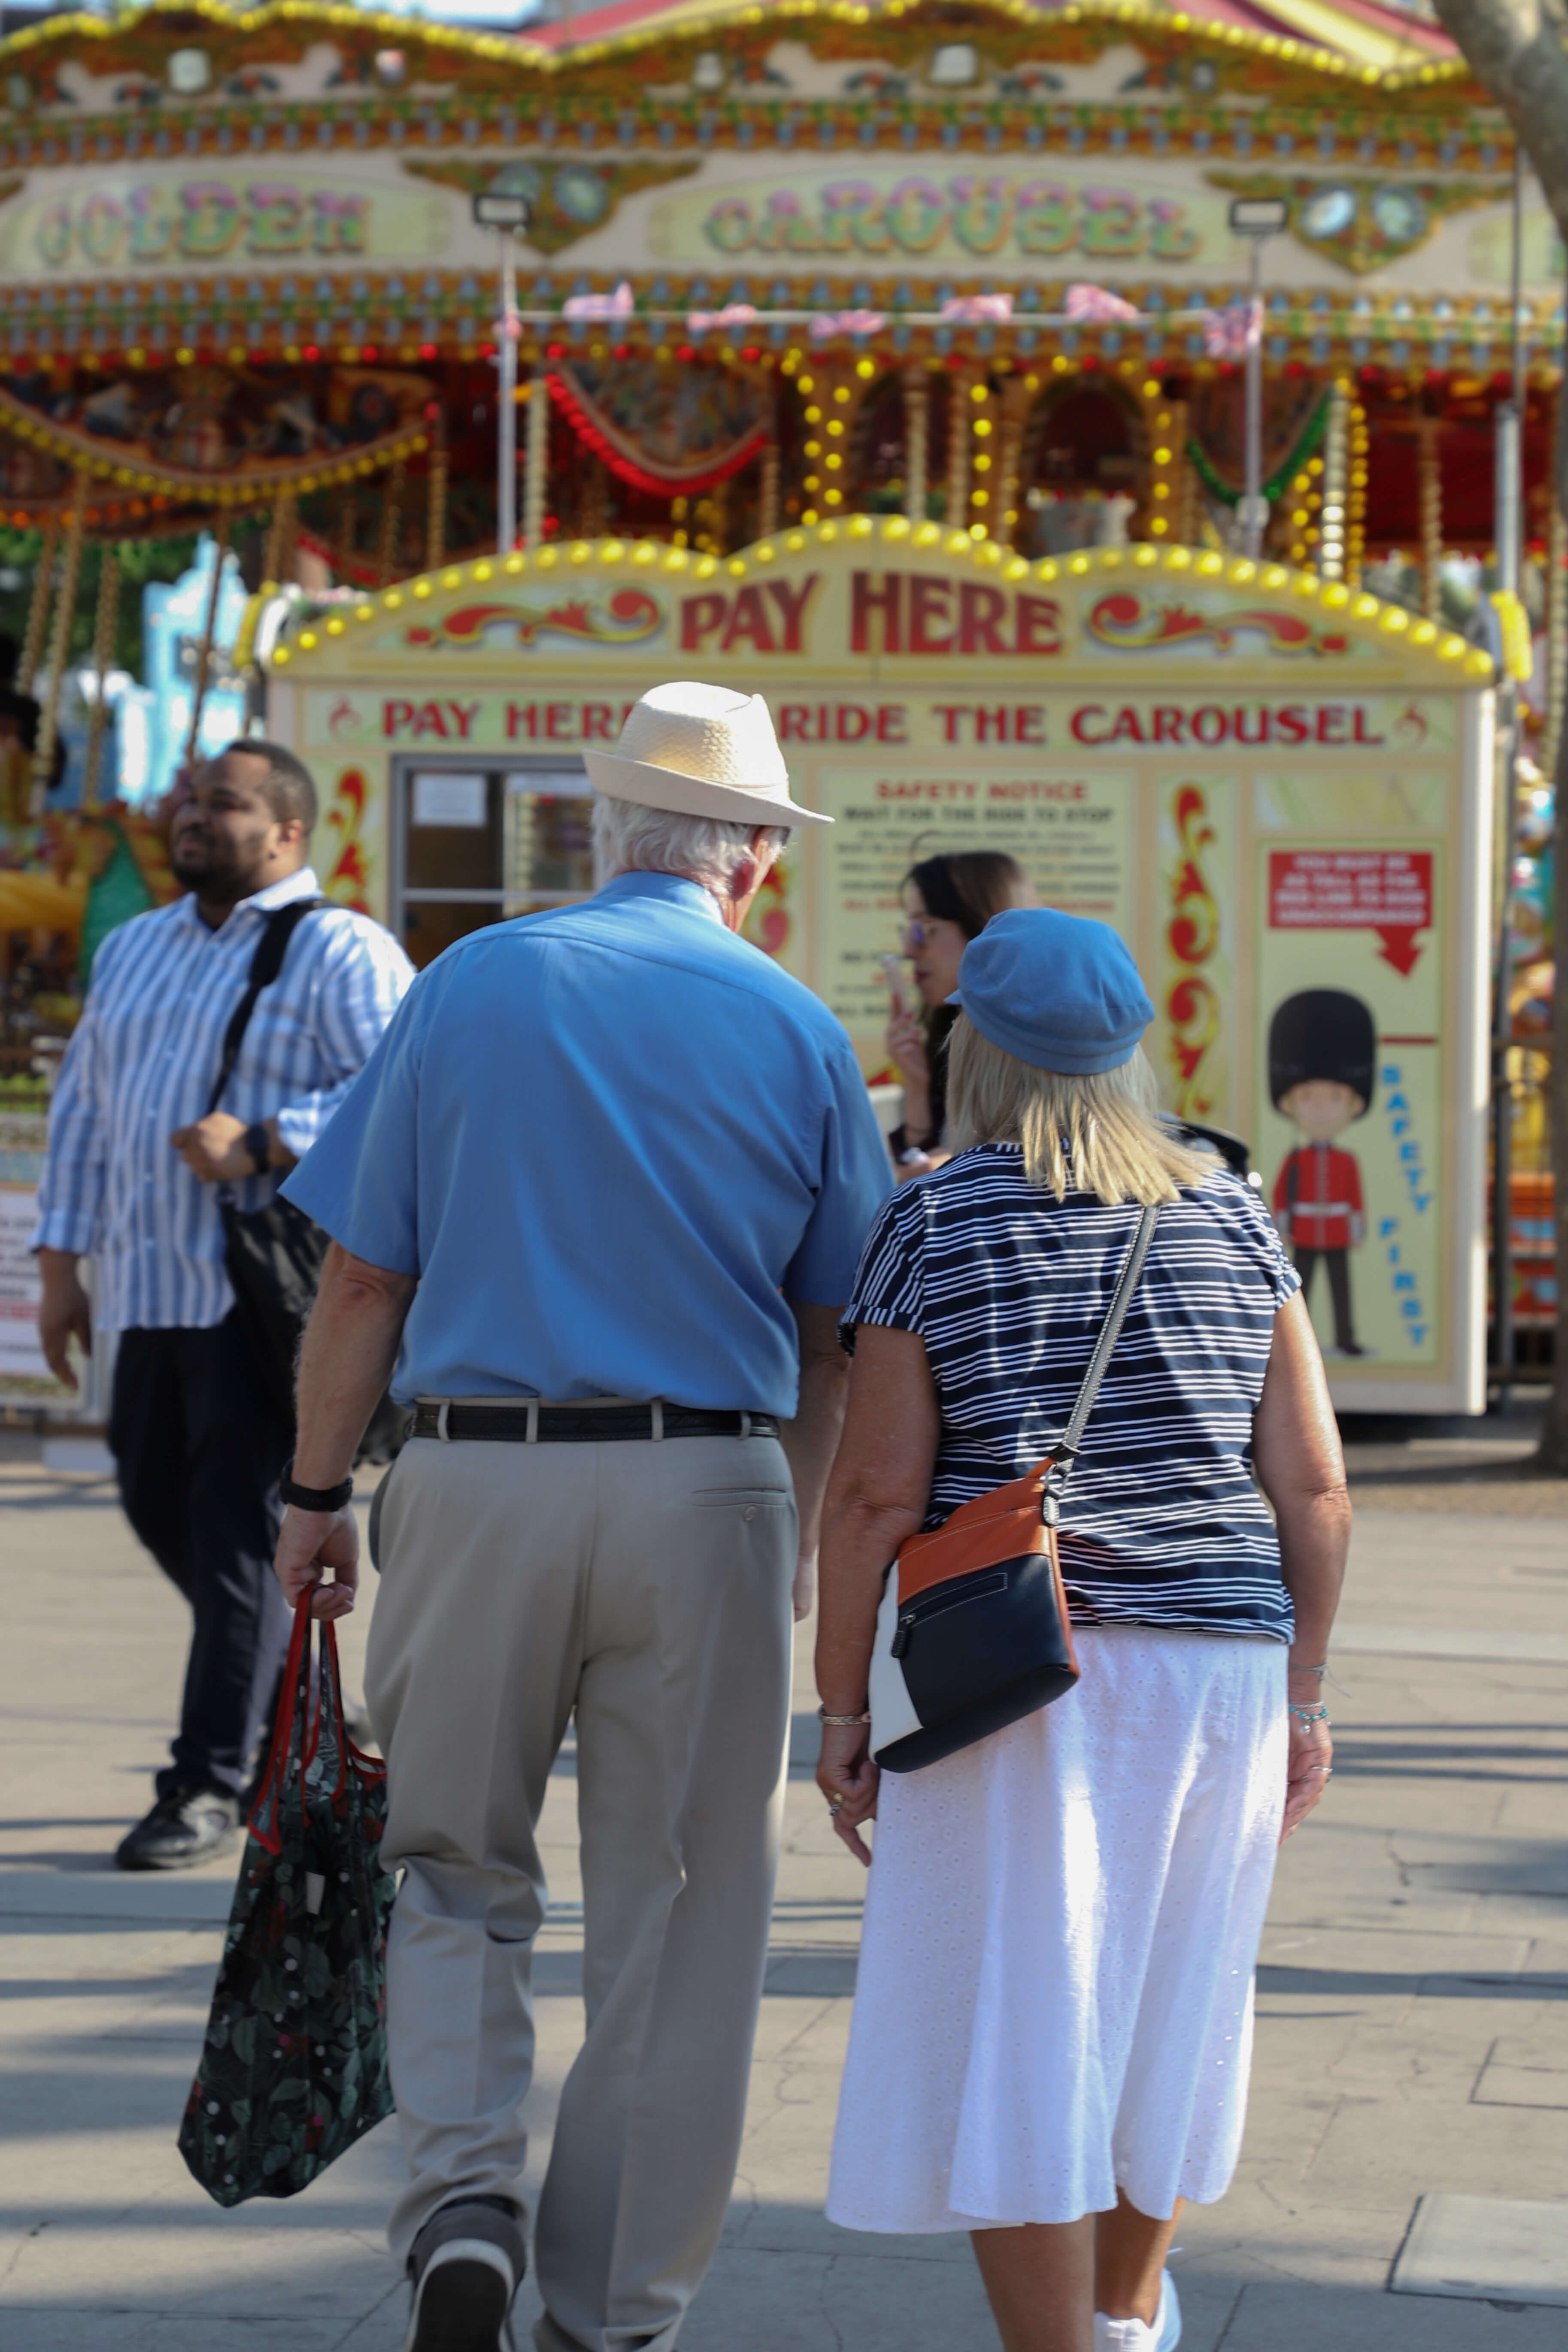 An older couple holding hands in a theme park.